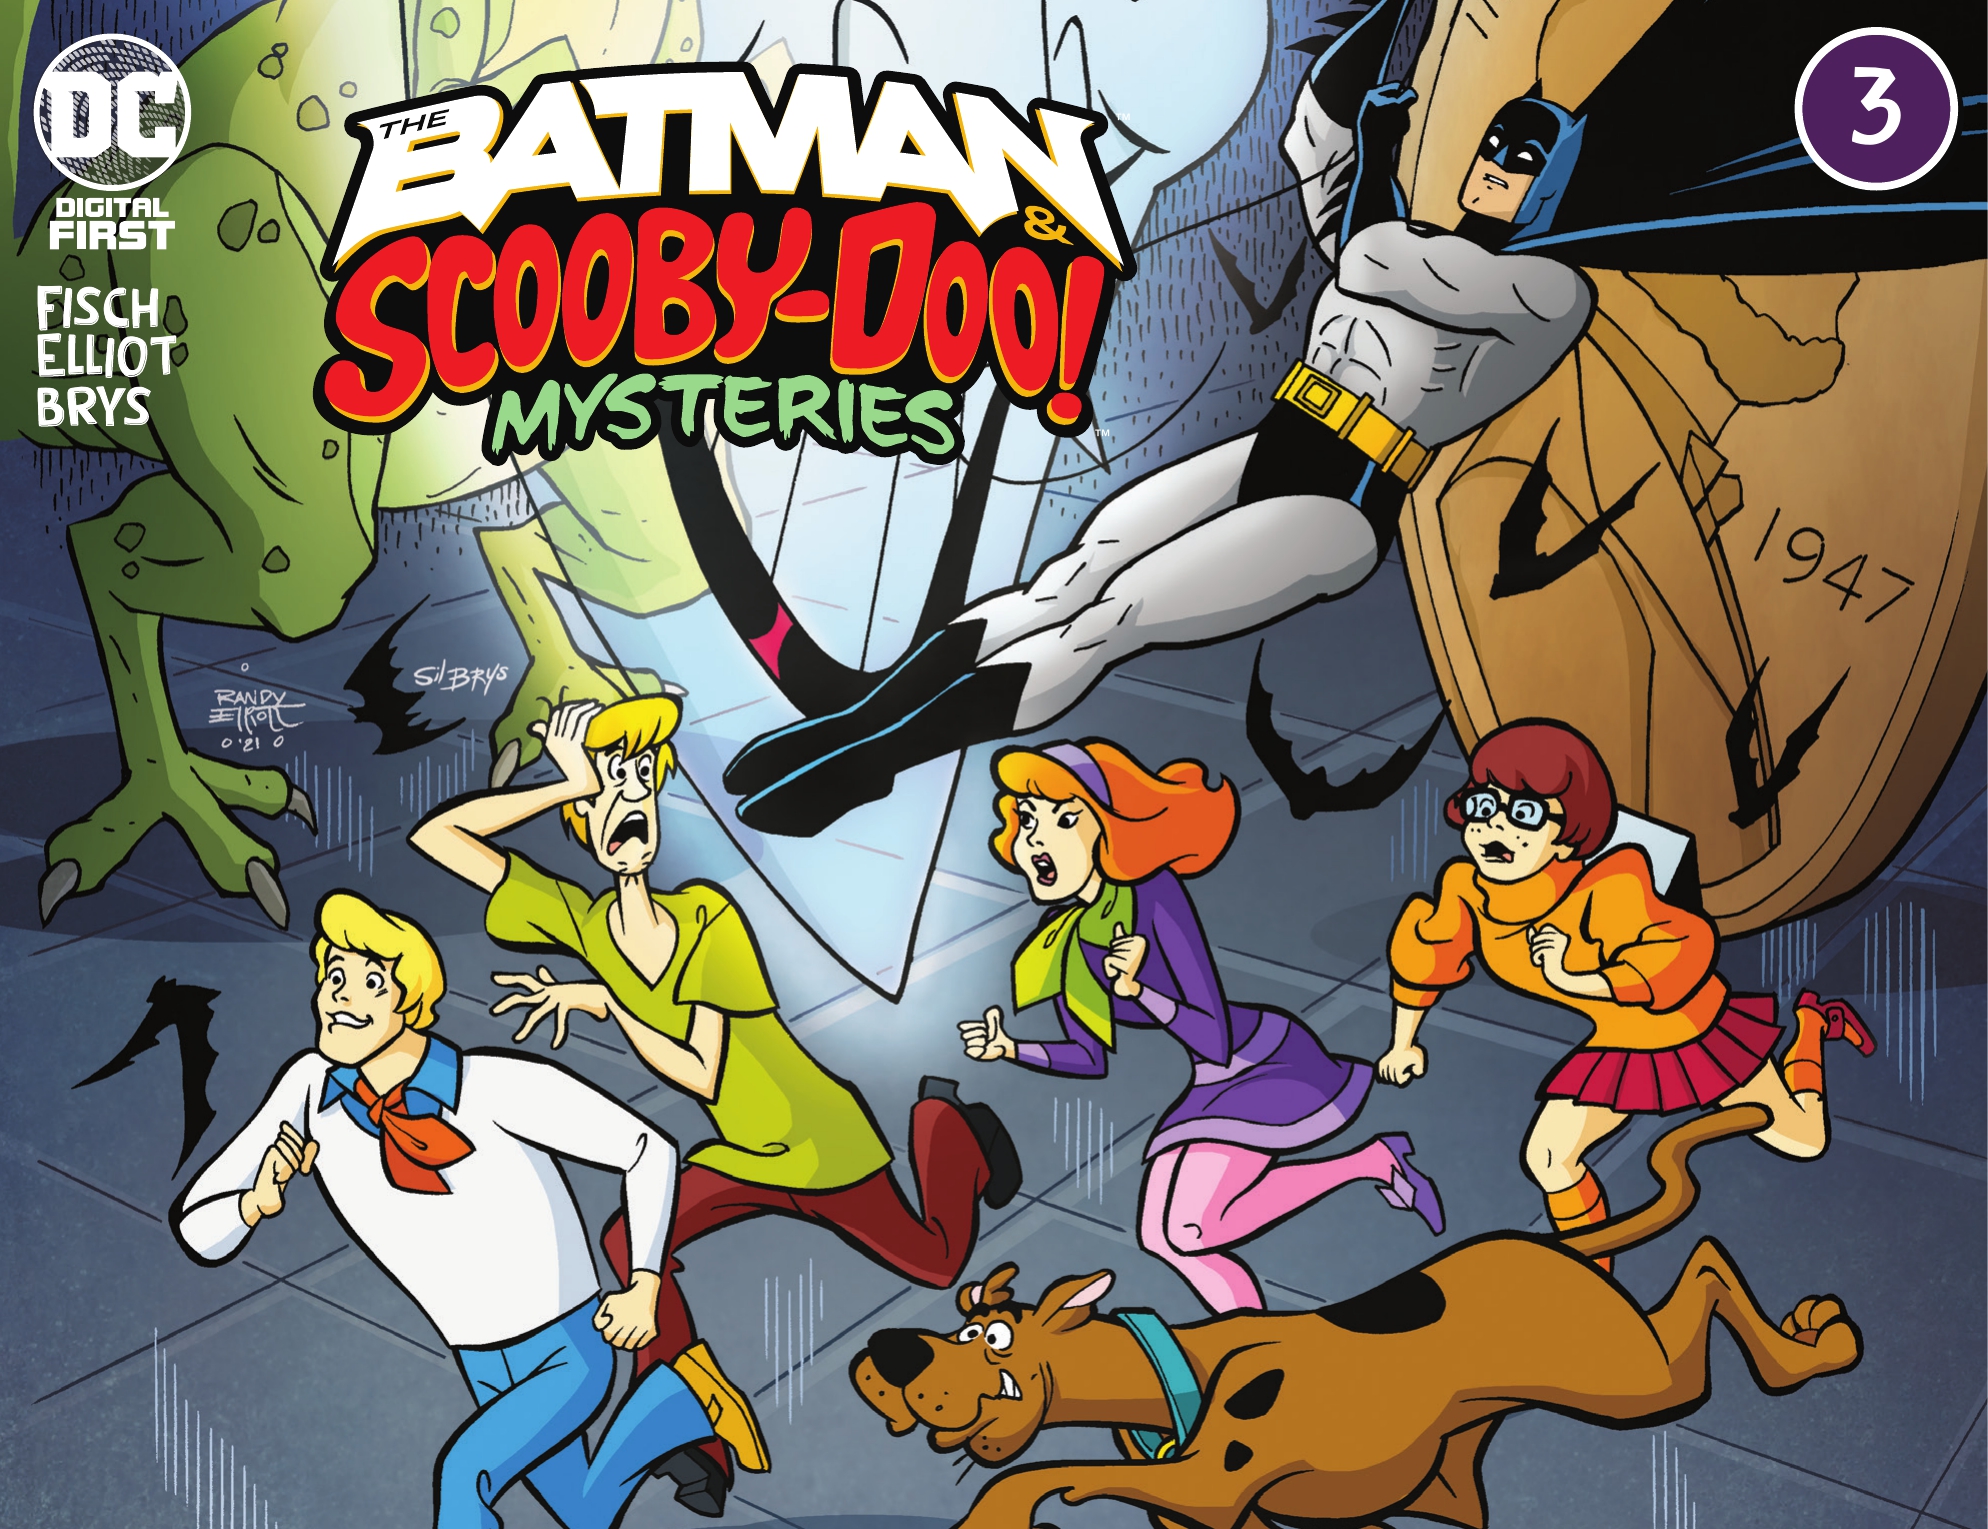 The Batman & Scooby-Doo Mysteries (2021-) (Digital First): Chapter 3 - Page 1